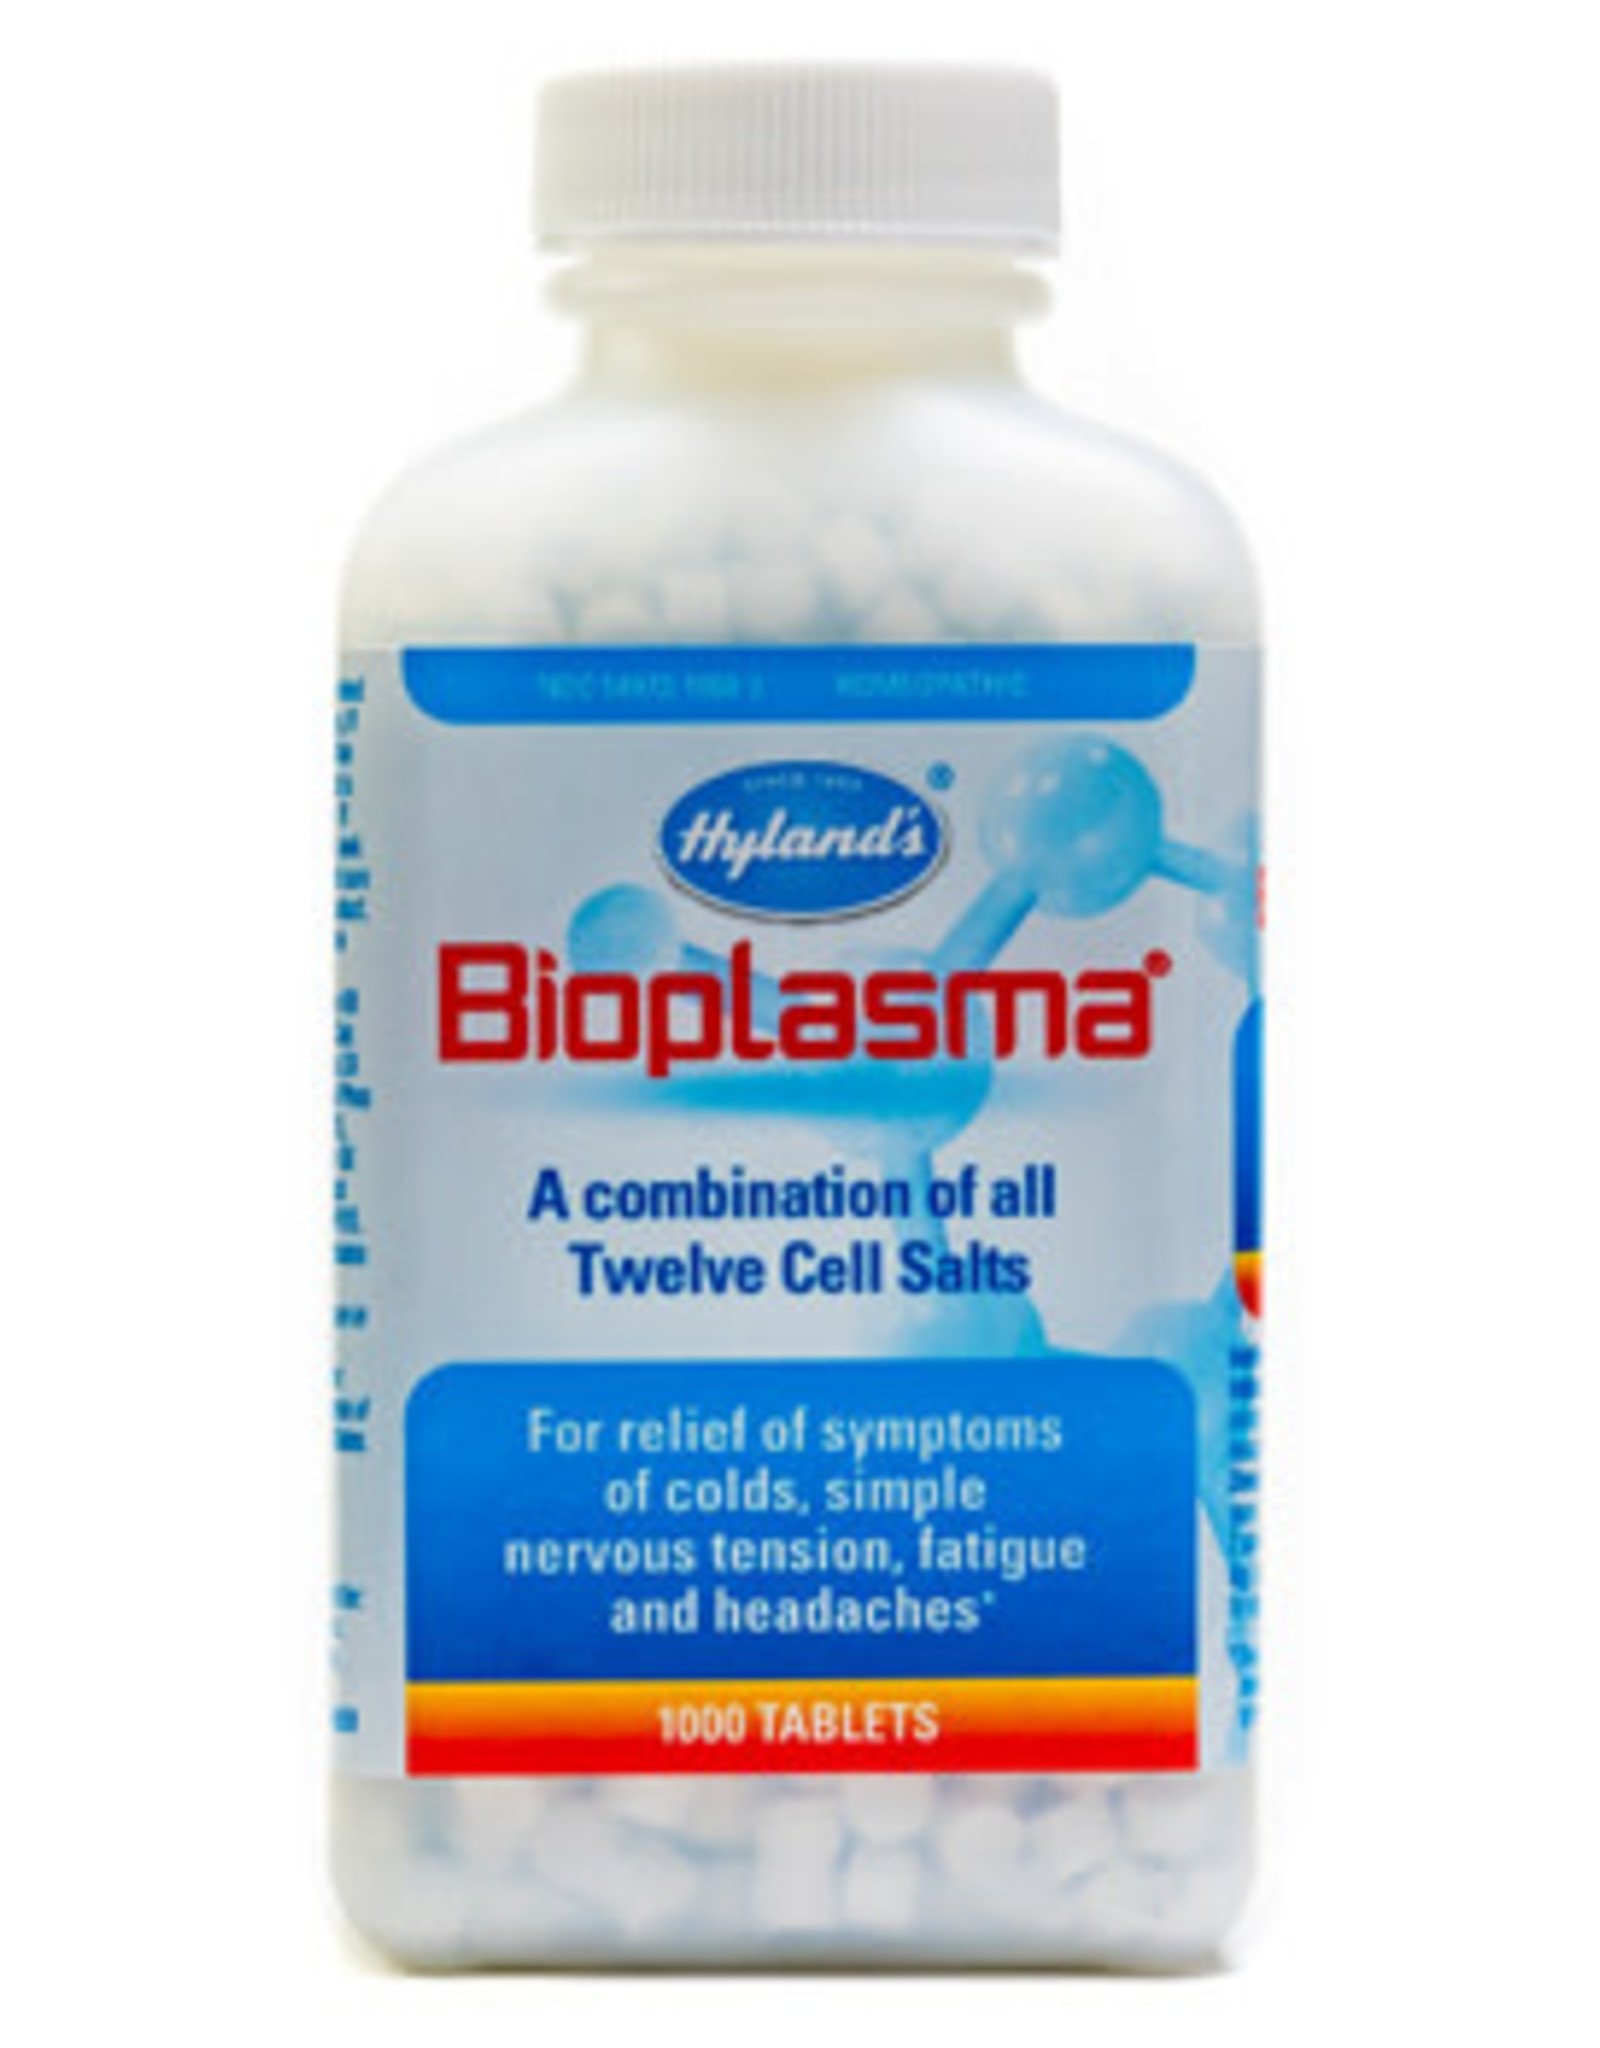 Hyland's Bioplasma-Combination of all 12 Cell Salts - 1000 tablets